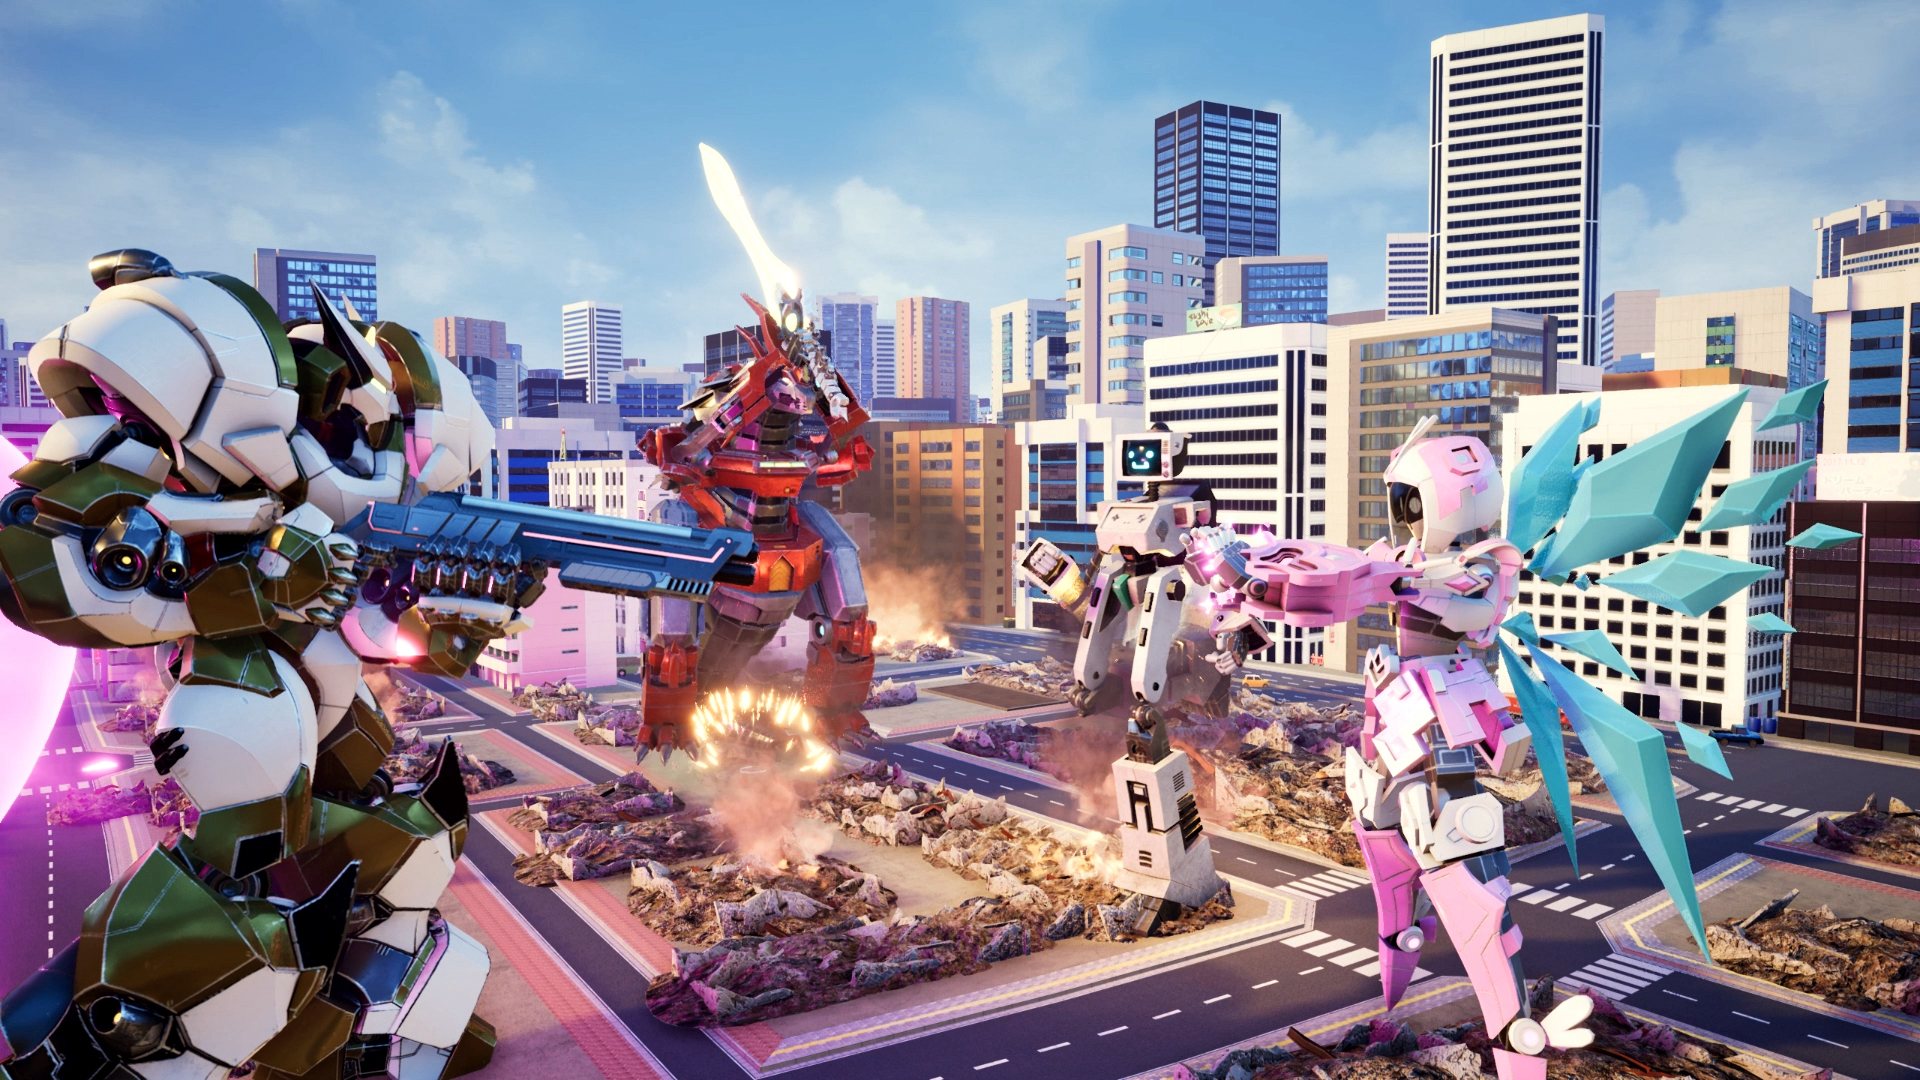 Override: Mech City Brawl - Super Charged Mega Edition Steam CD Key